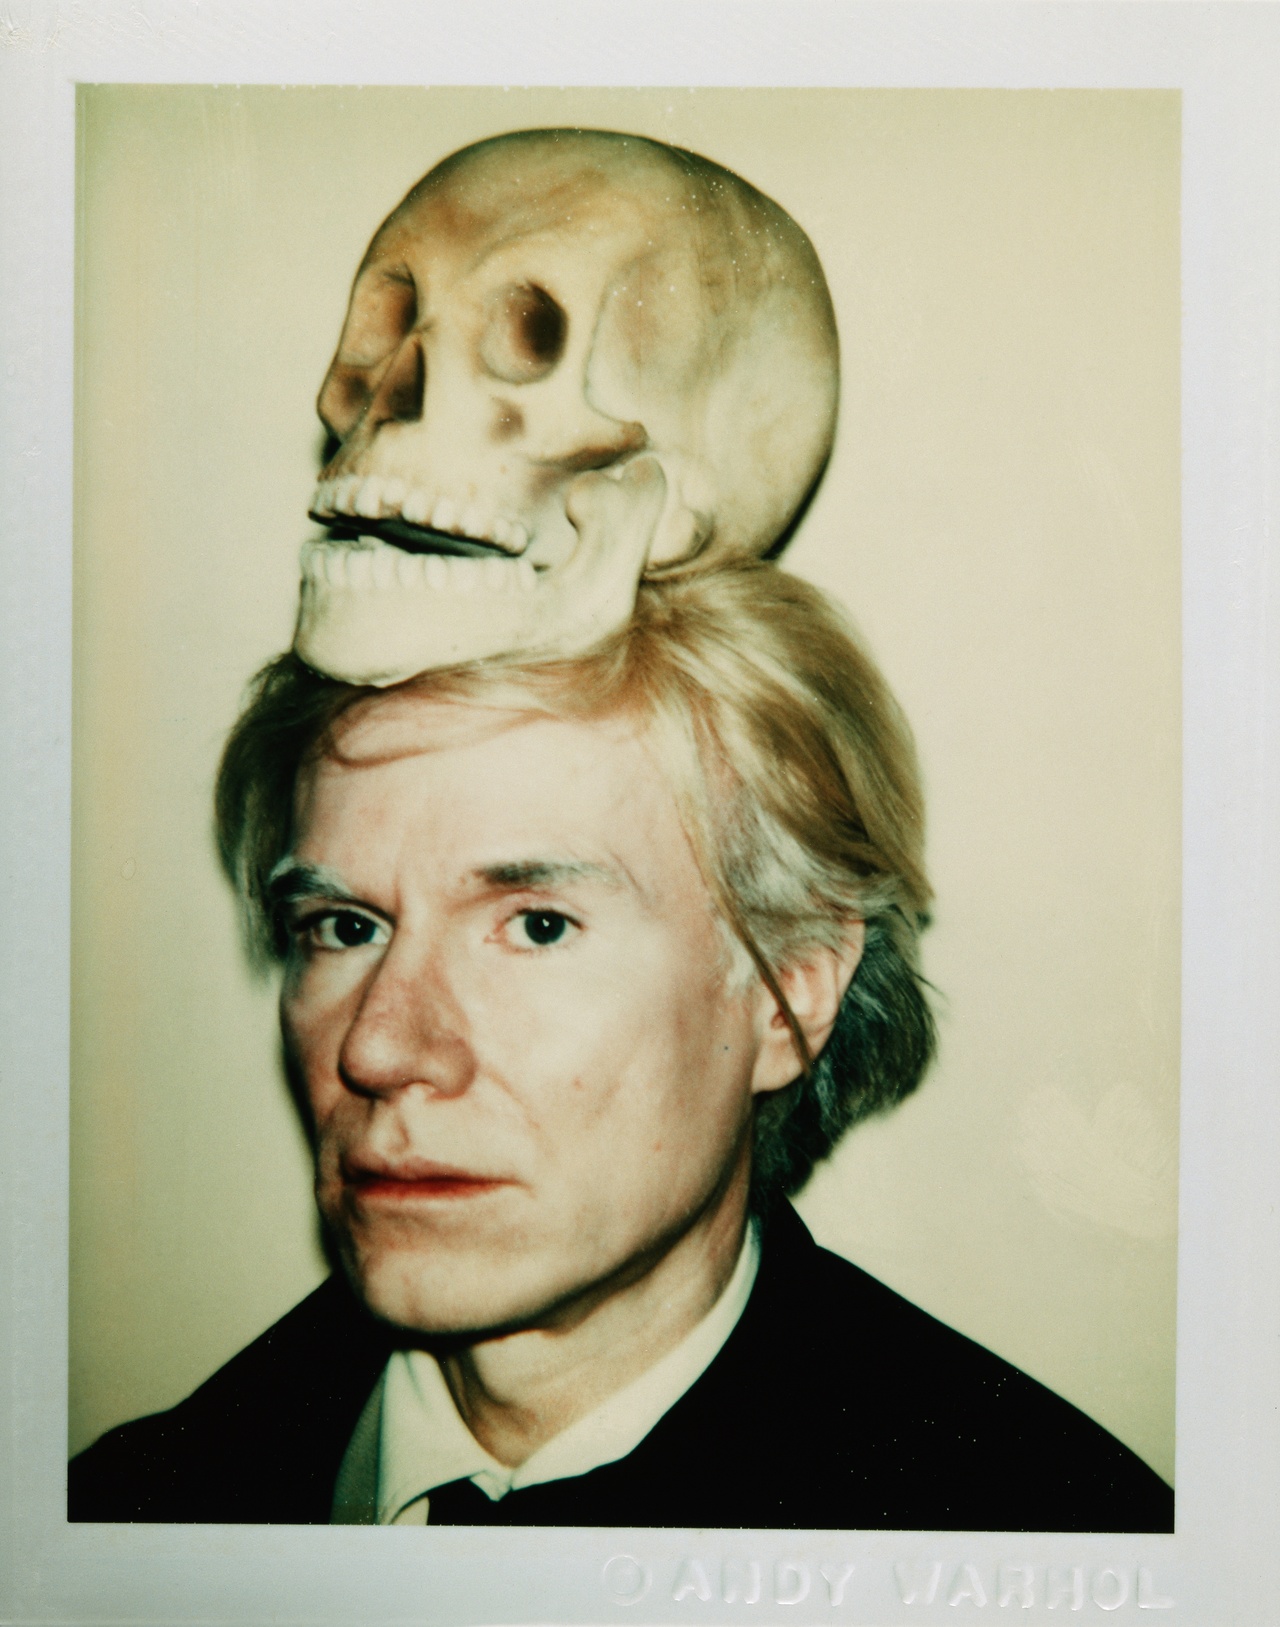 Andrew Rossi, “The Andy Warhol Diaries,” 2022, film still